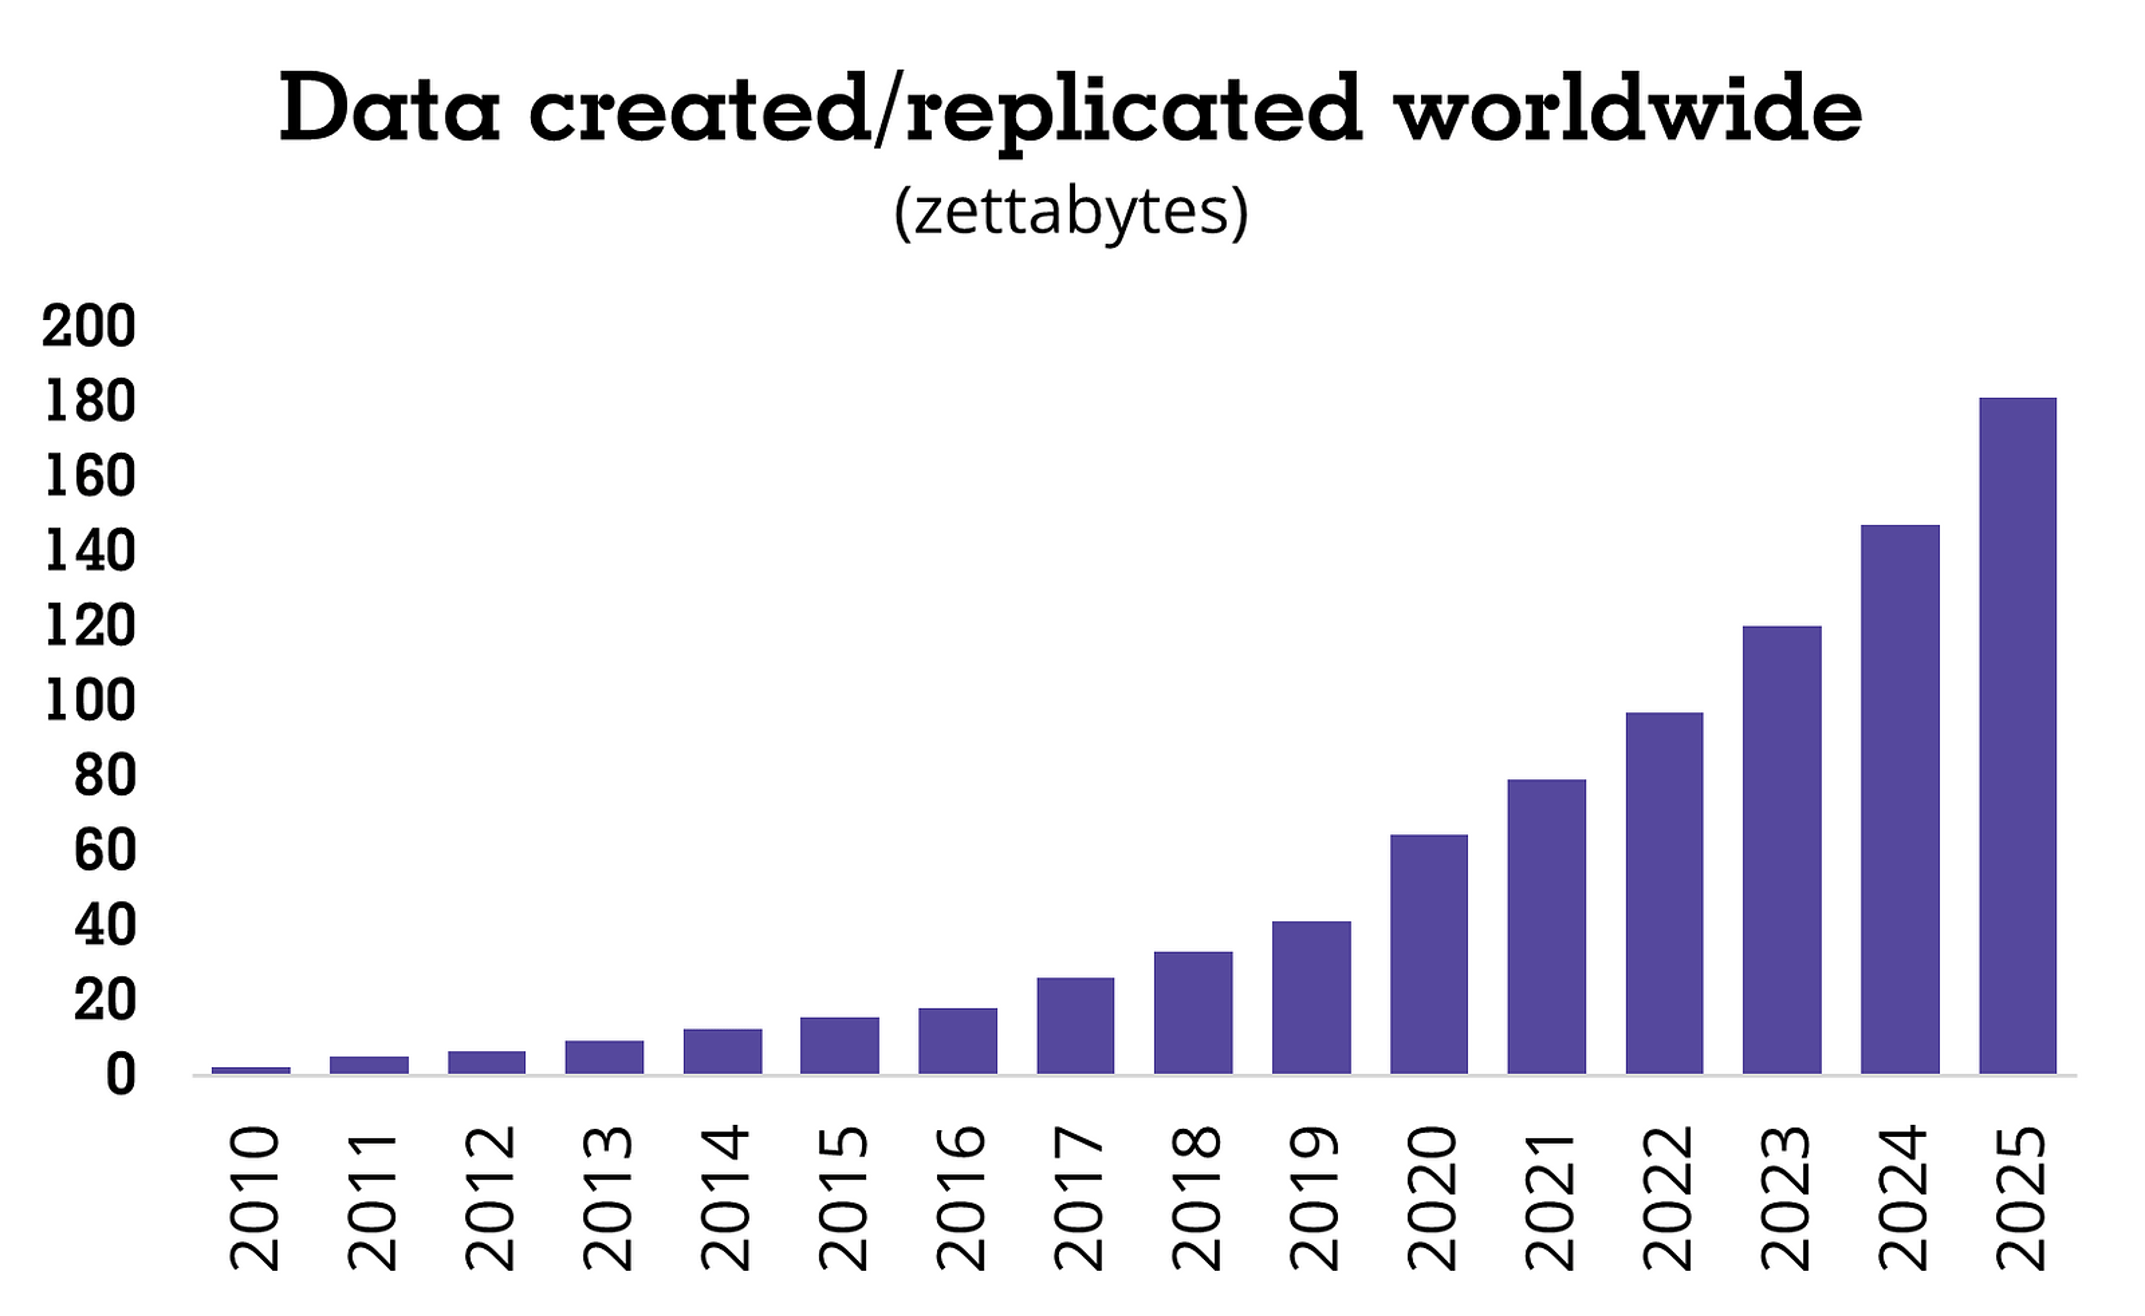 data in zettabytes created or replicated annually worldwide